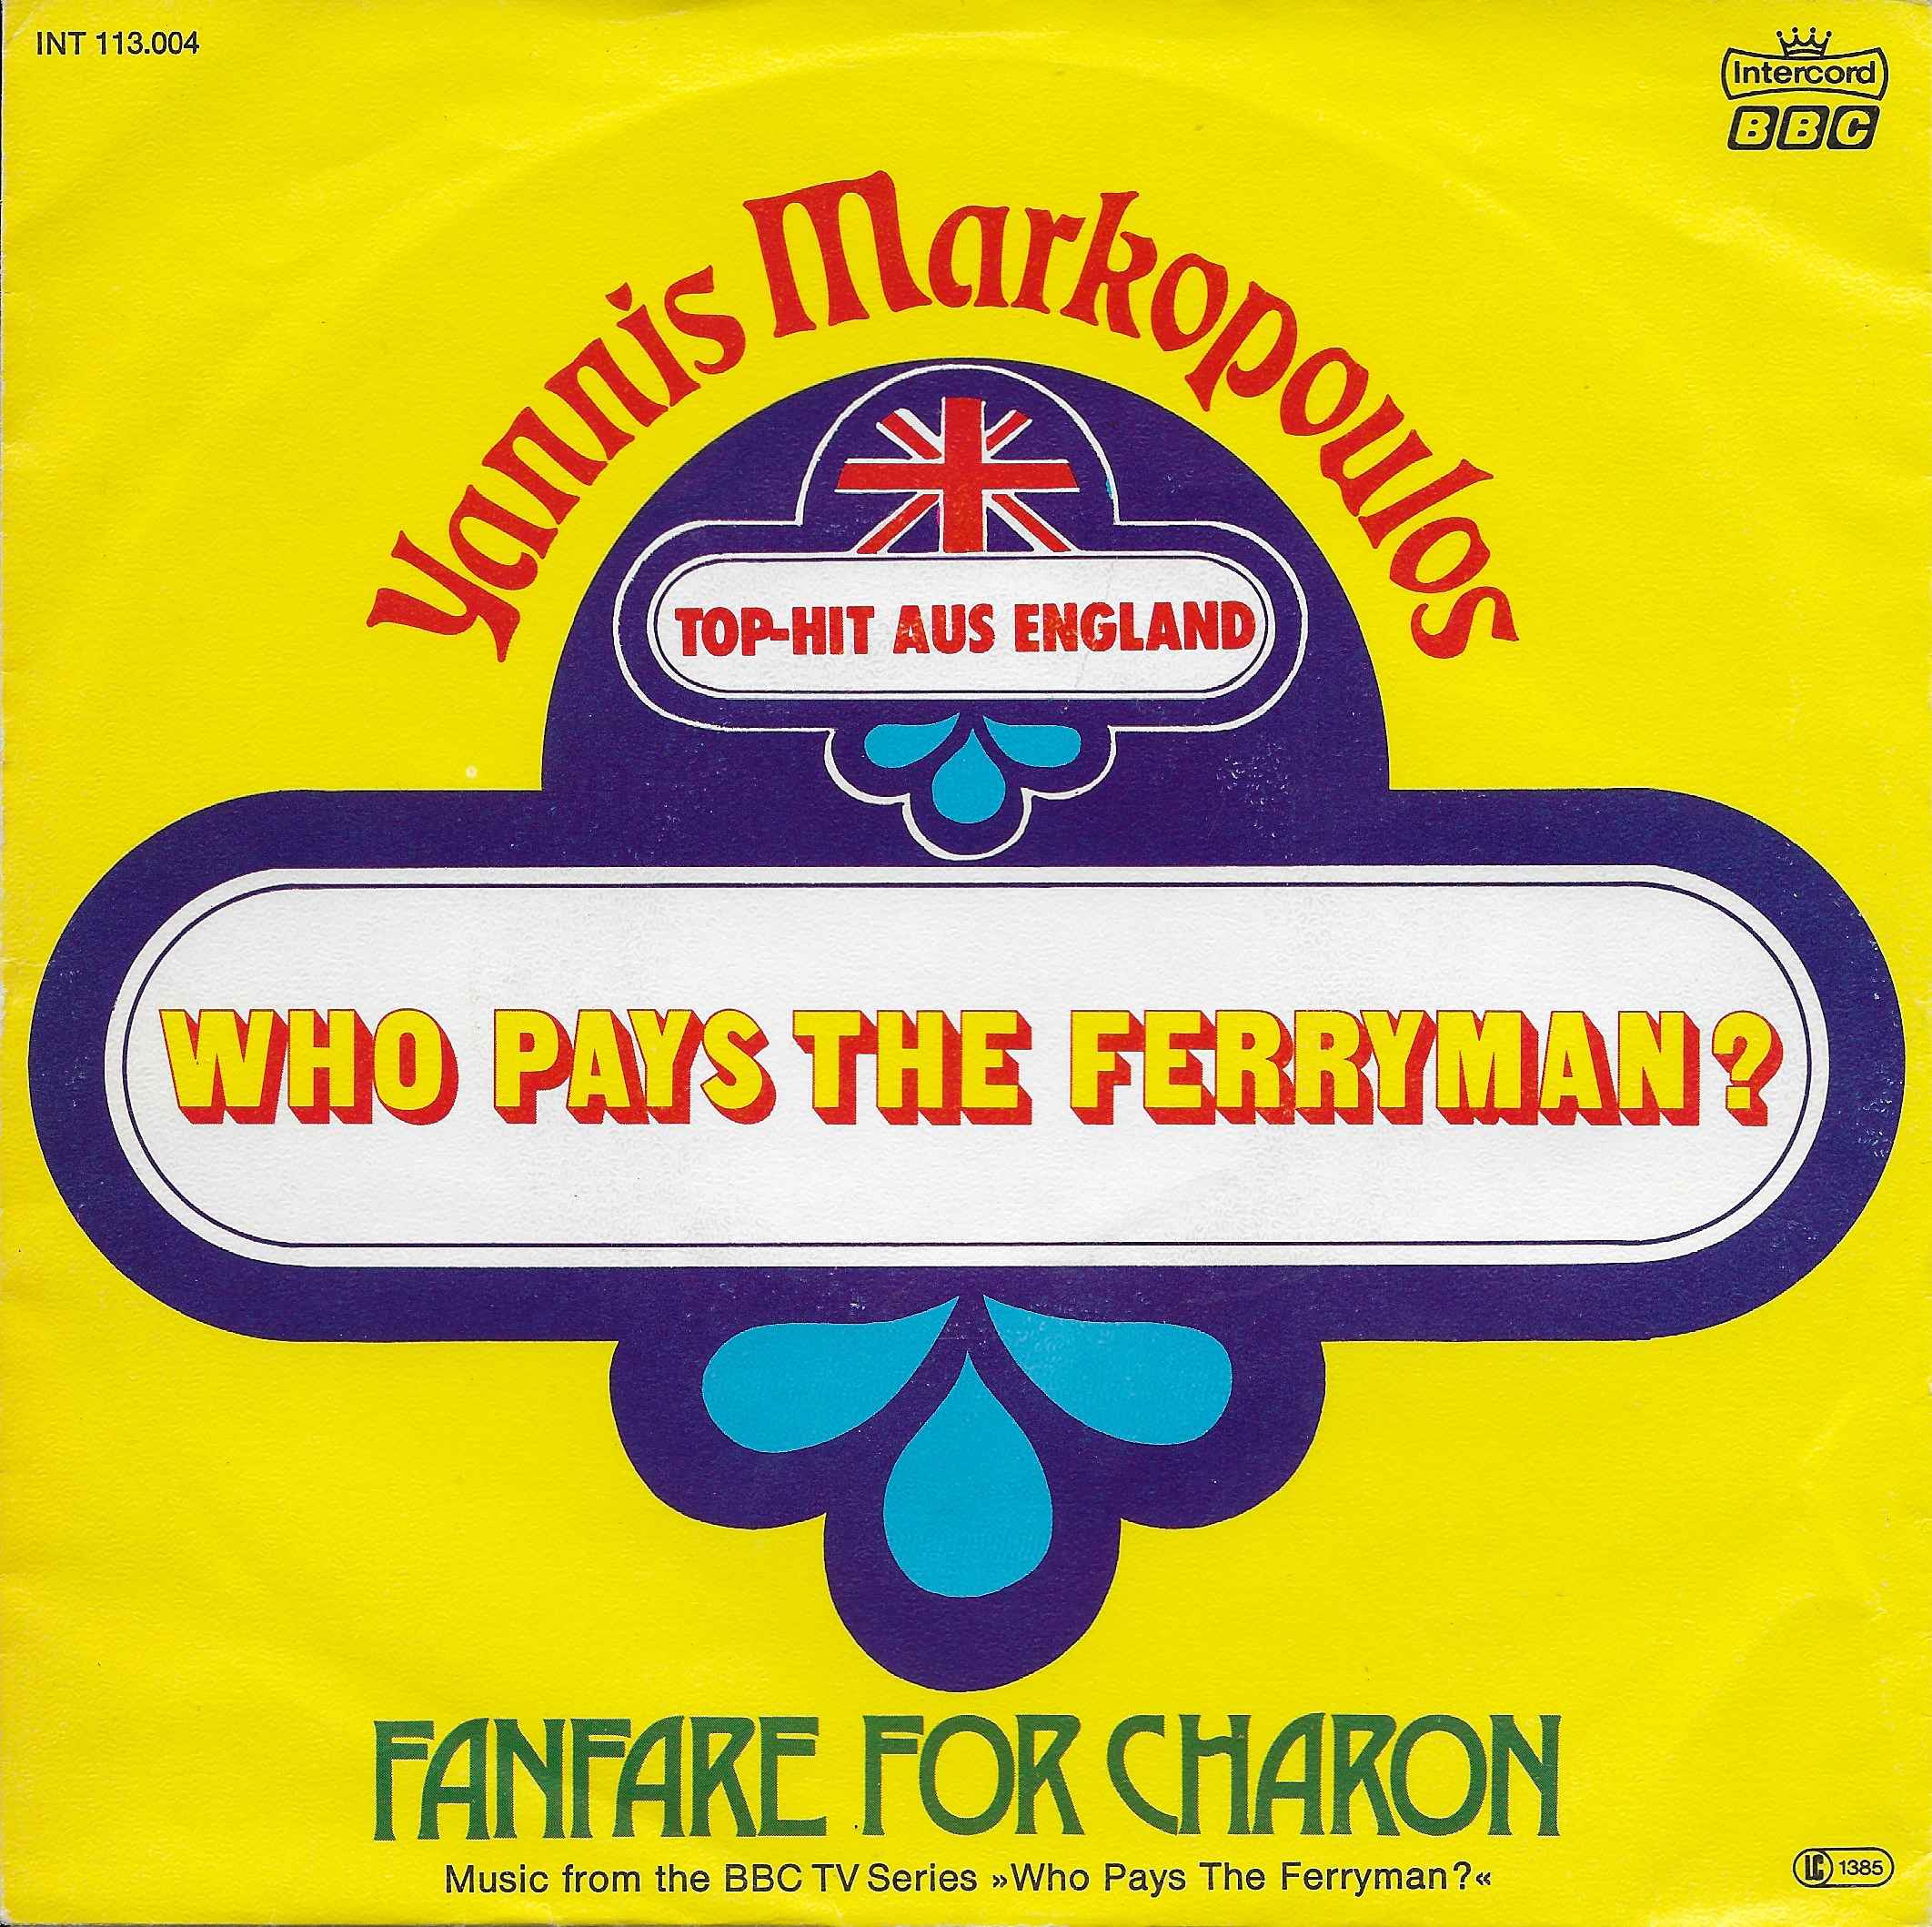 Picture of INT 113.004 Who pays the ferryman? by artist Yannis Markopoulos from the BBC records and Tapes library